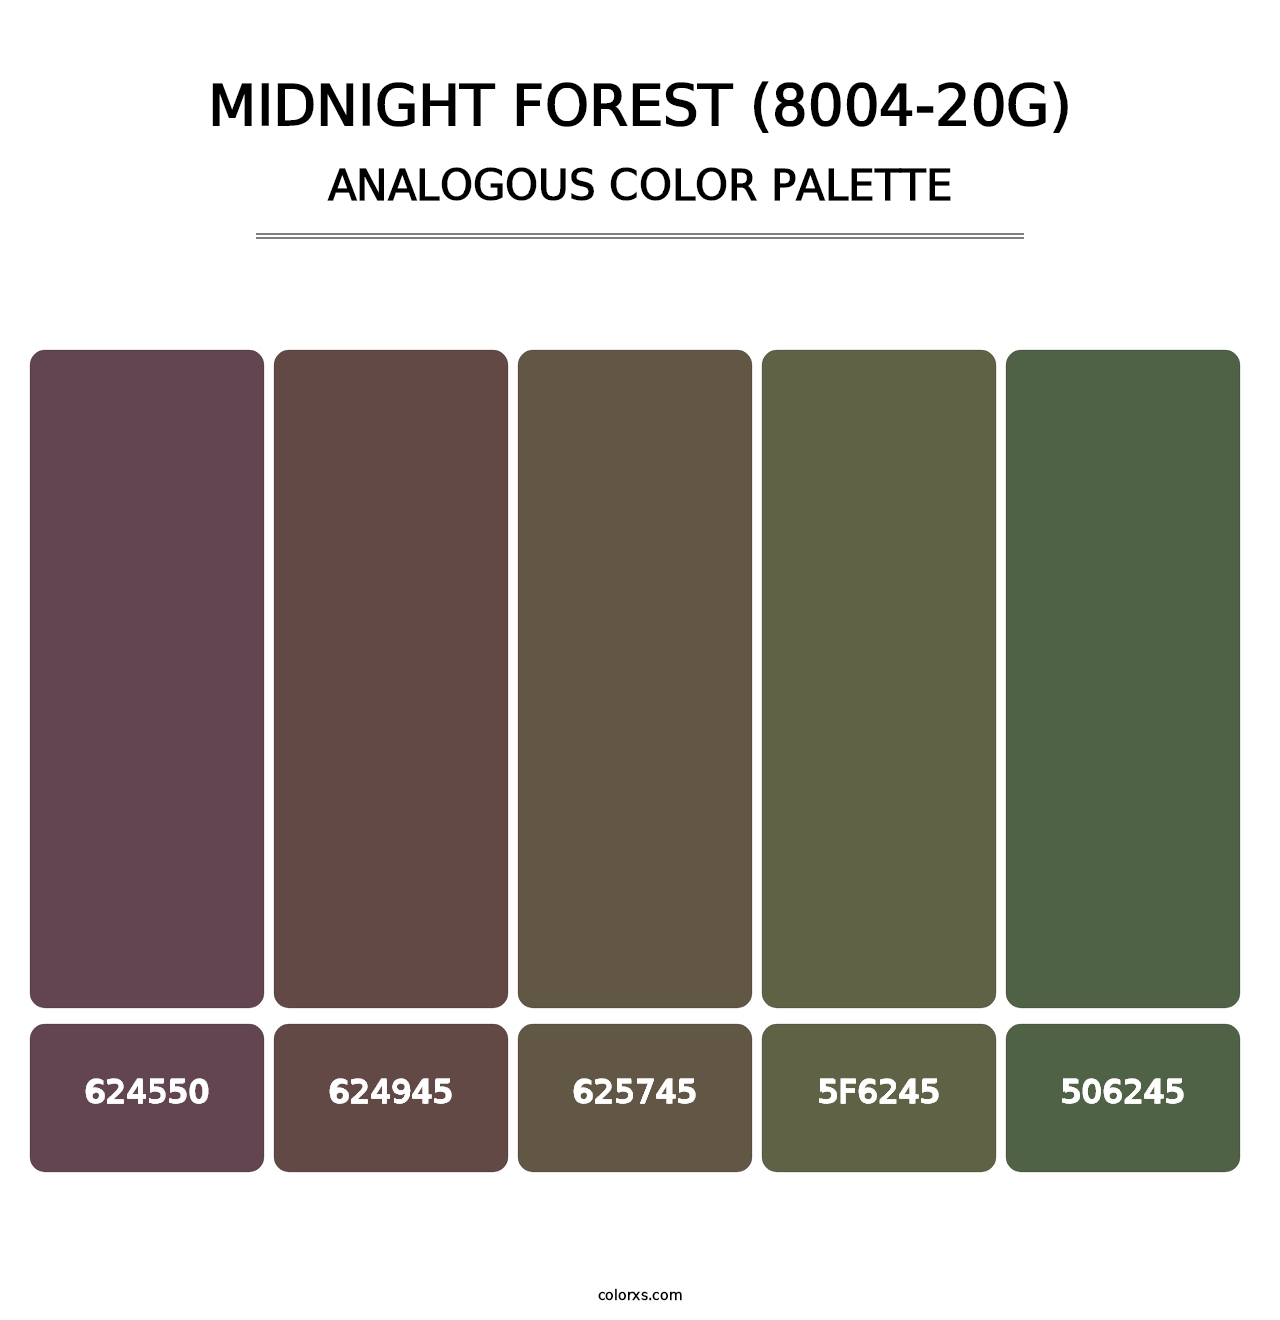 Midnight Forest (8004-20G) - Analogous Color Palette